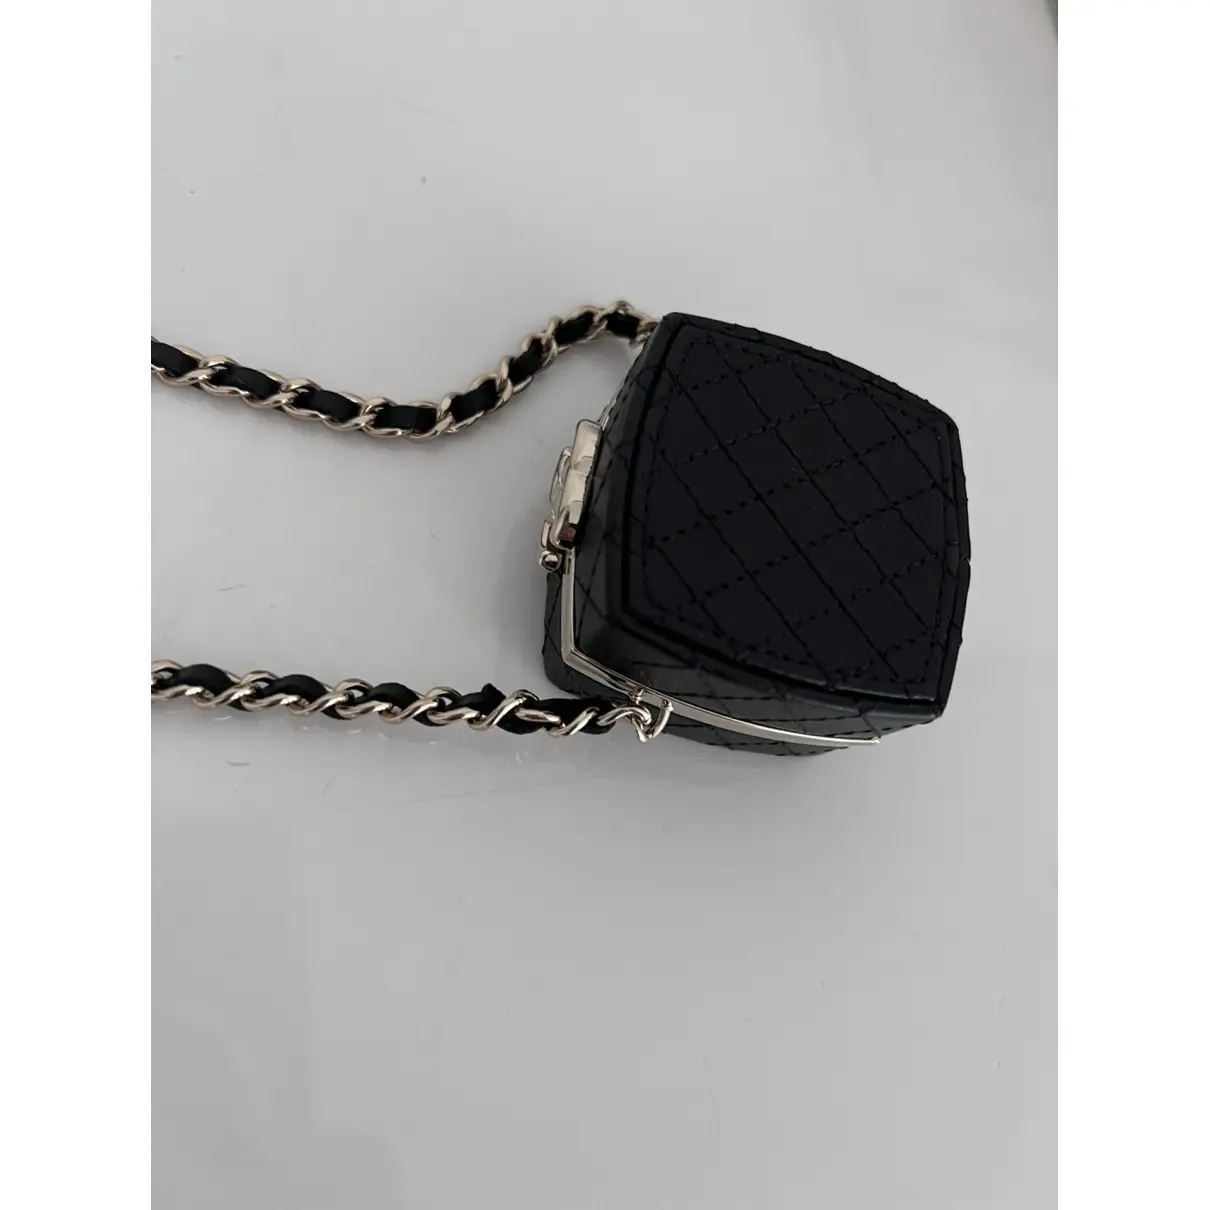 Buy Chanel Leather necklace online